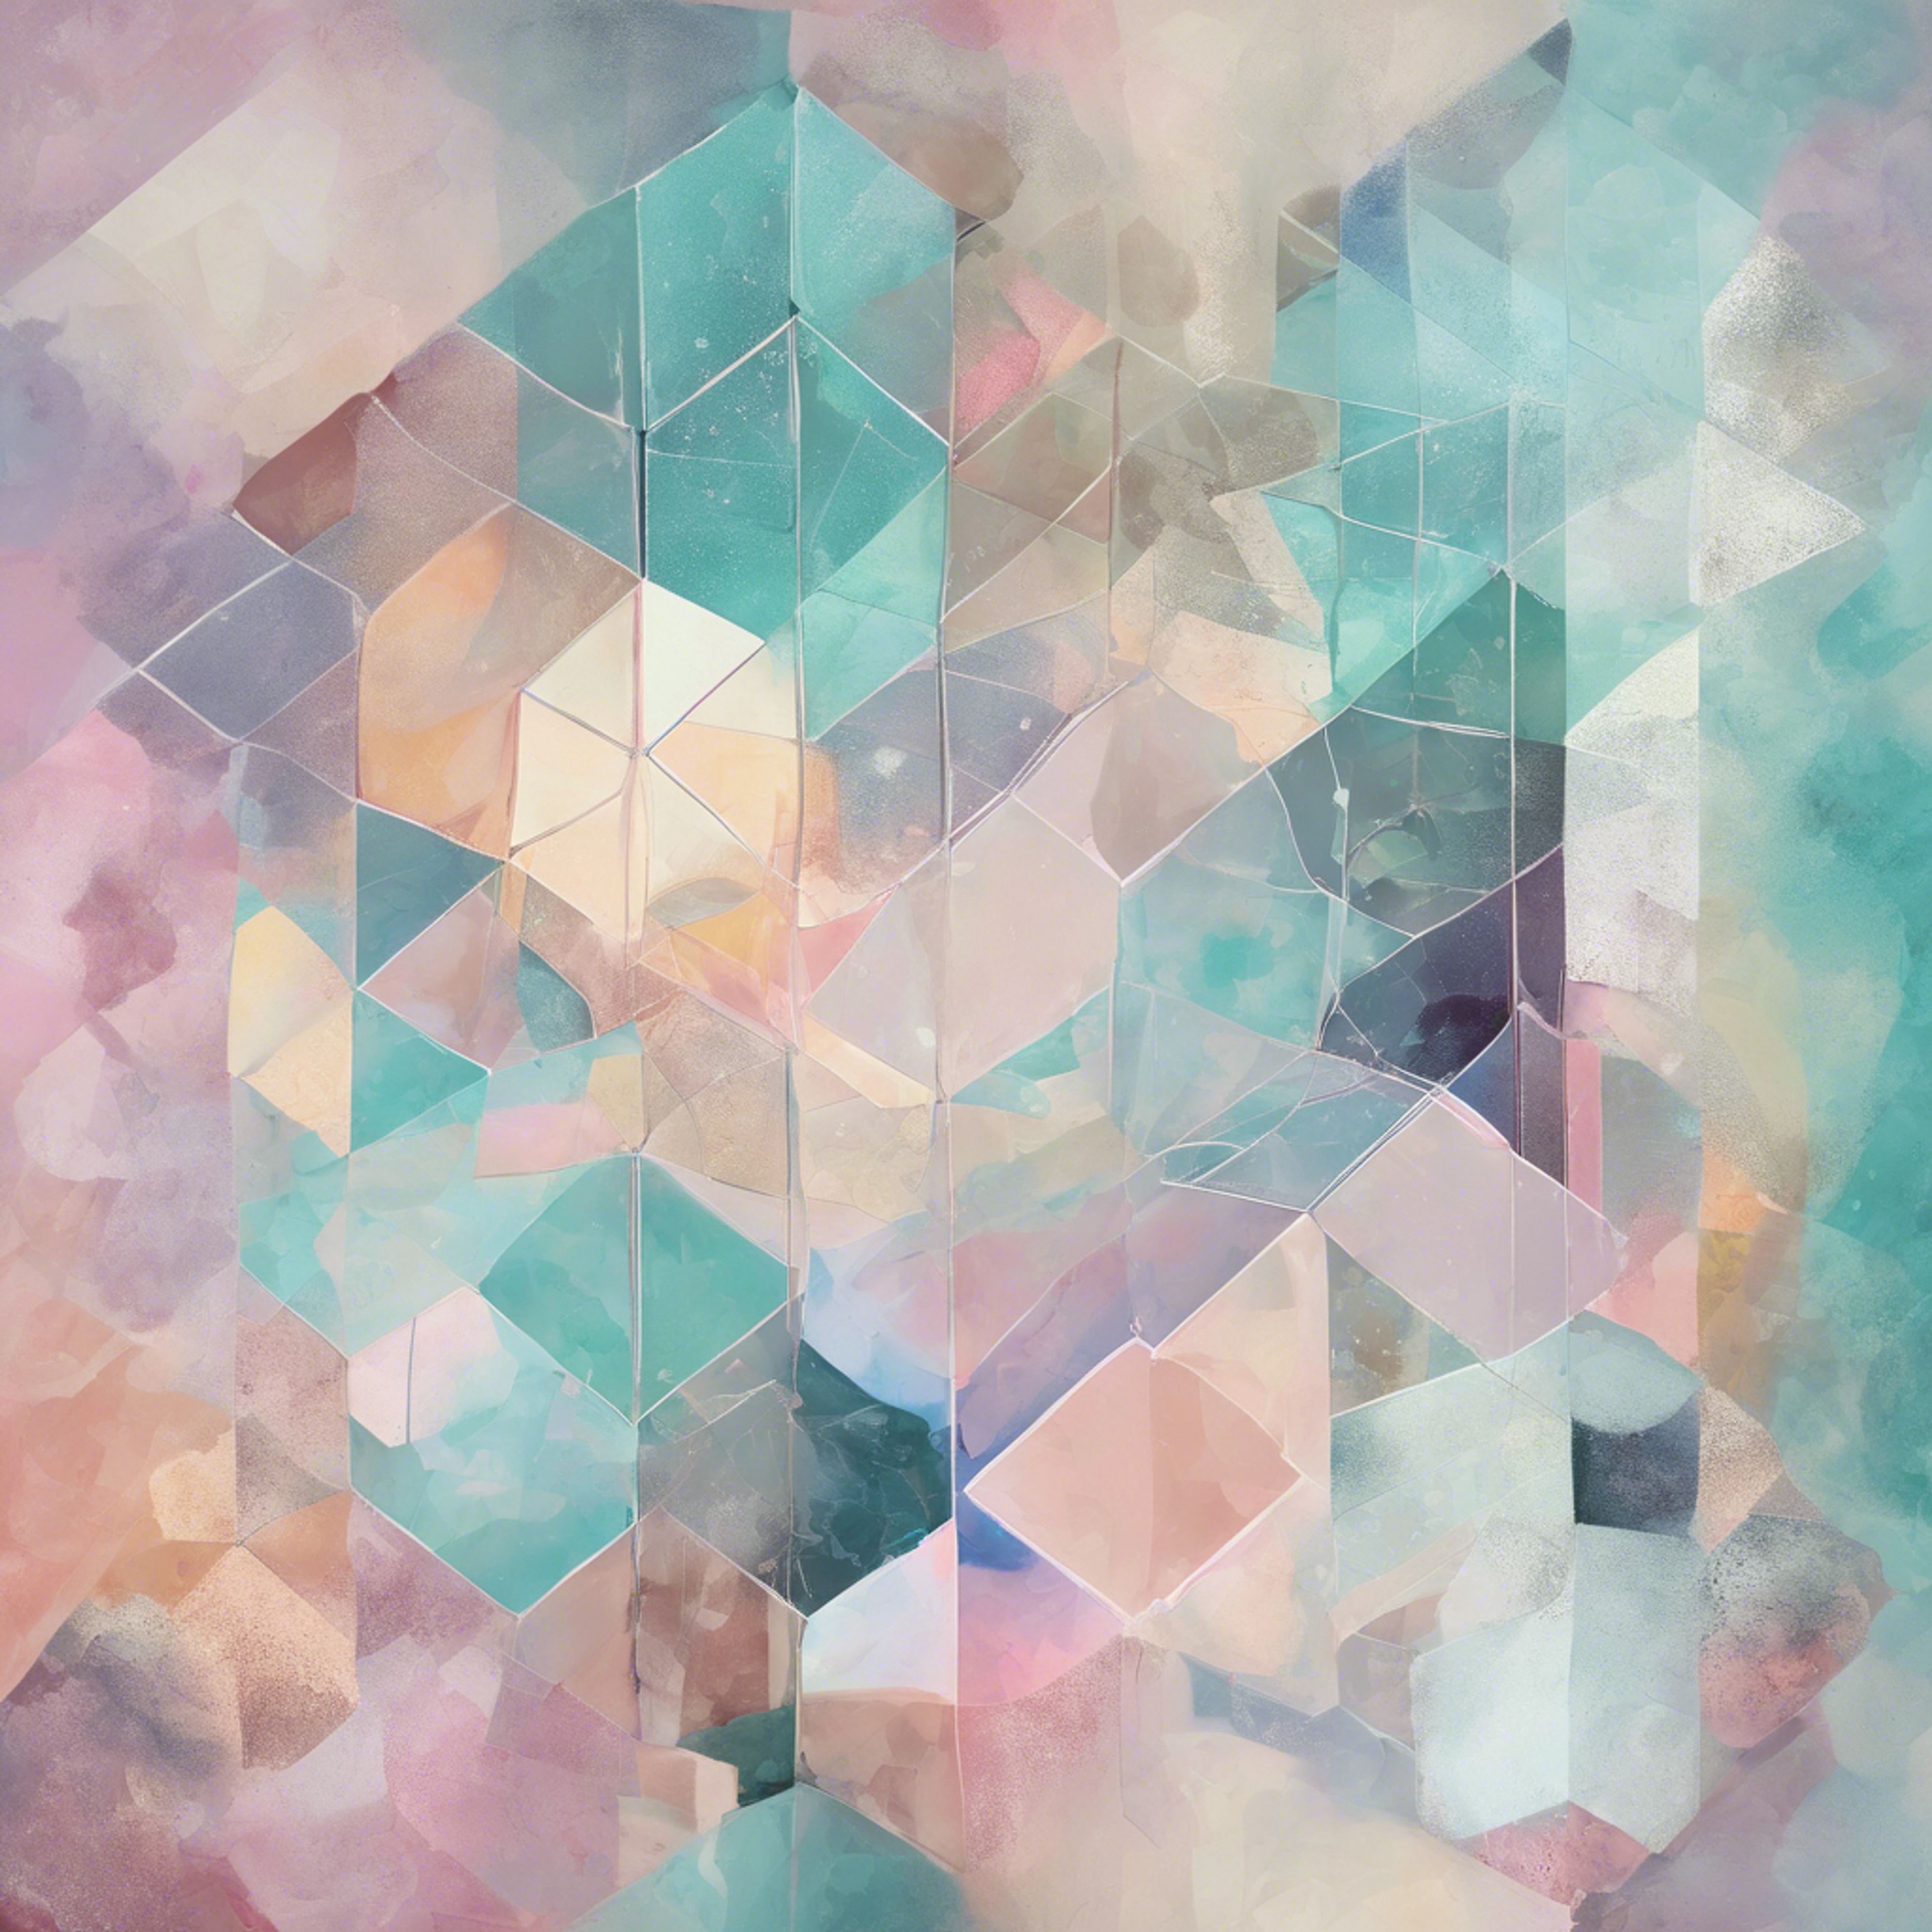 A cool pastel colored abstract painting emphasizing geometric patterns. Tapet[4610bdb5de564f779c91]